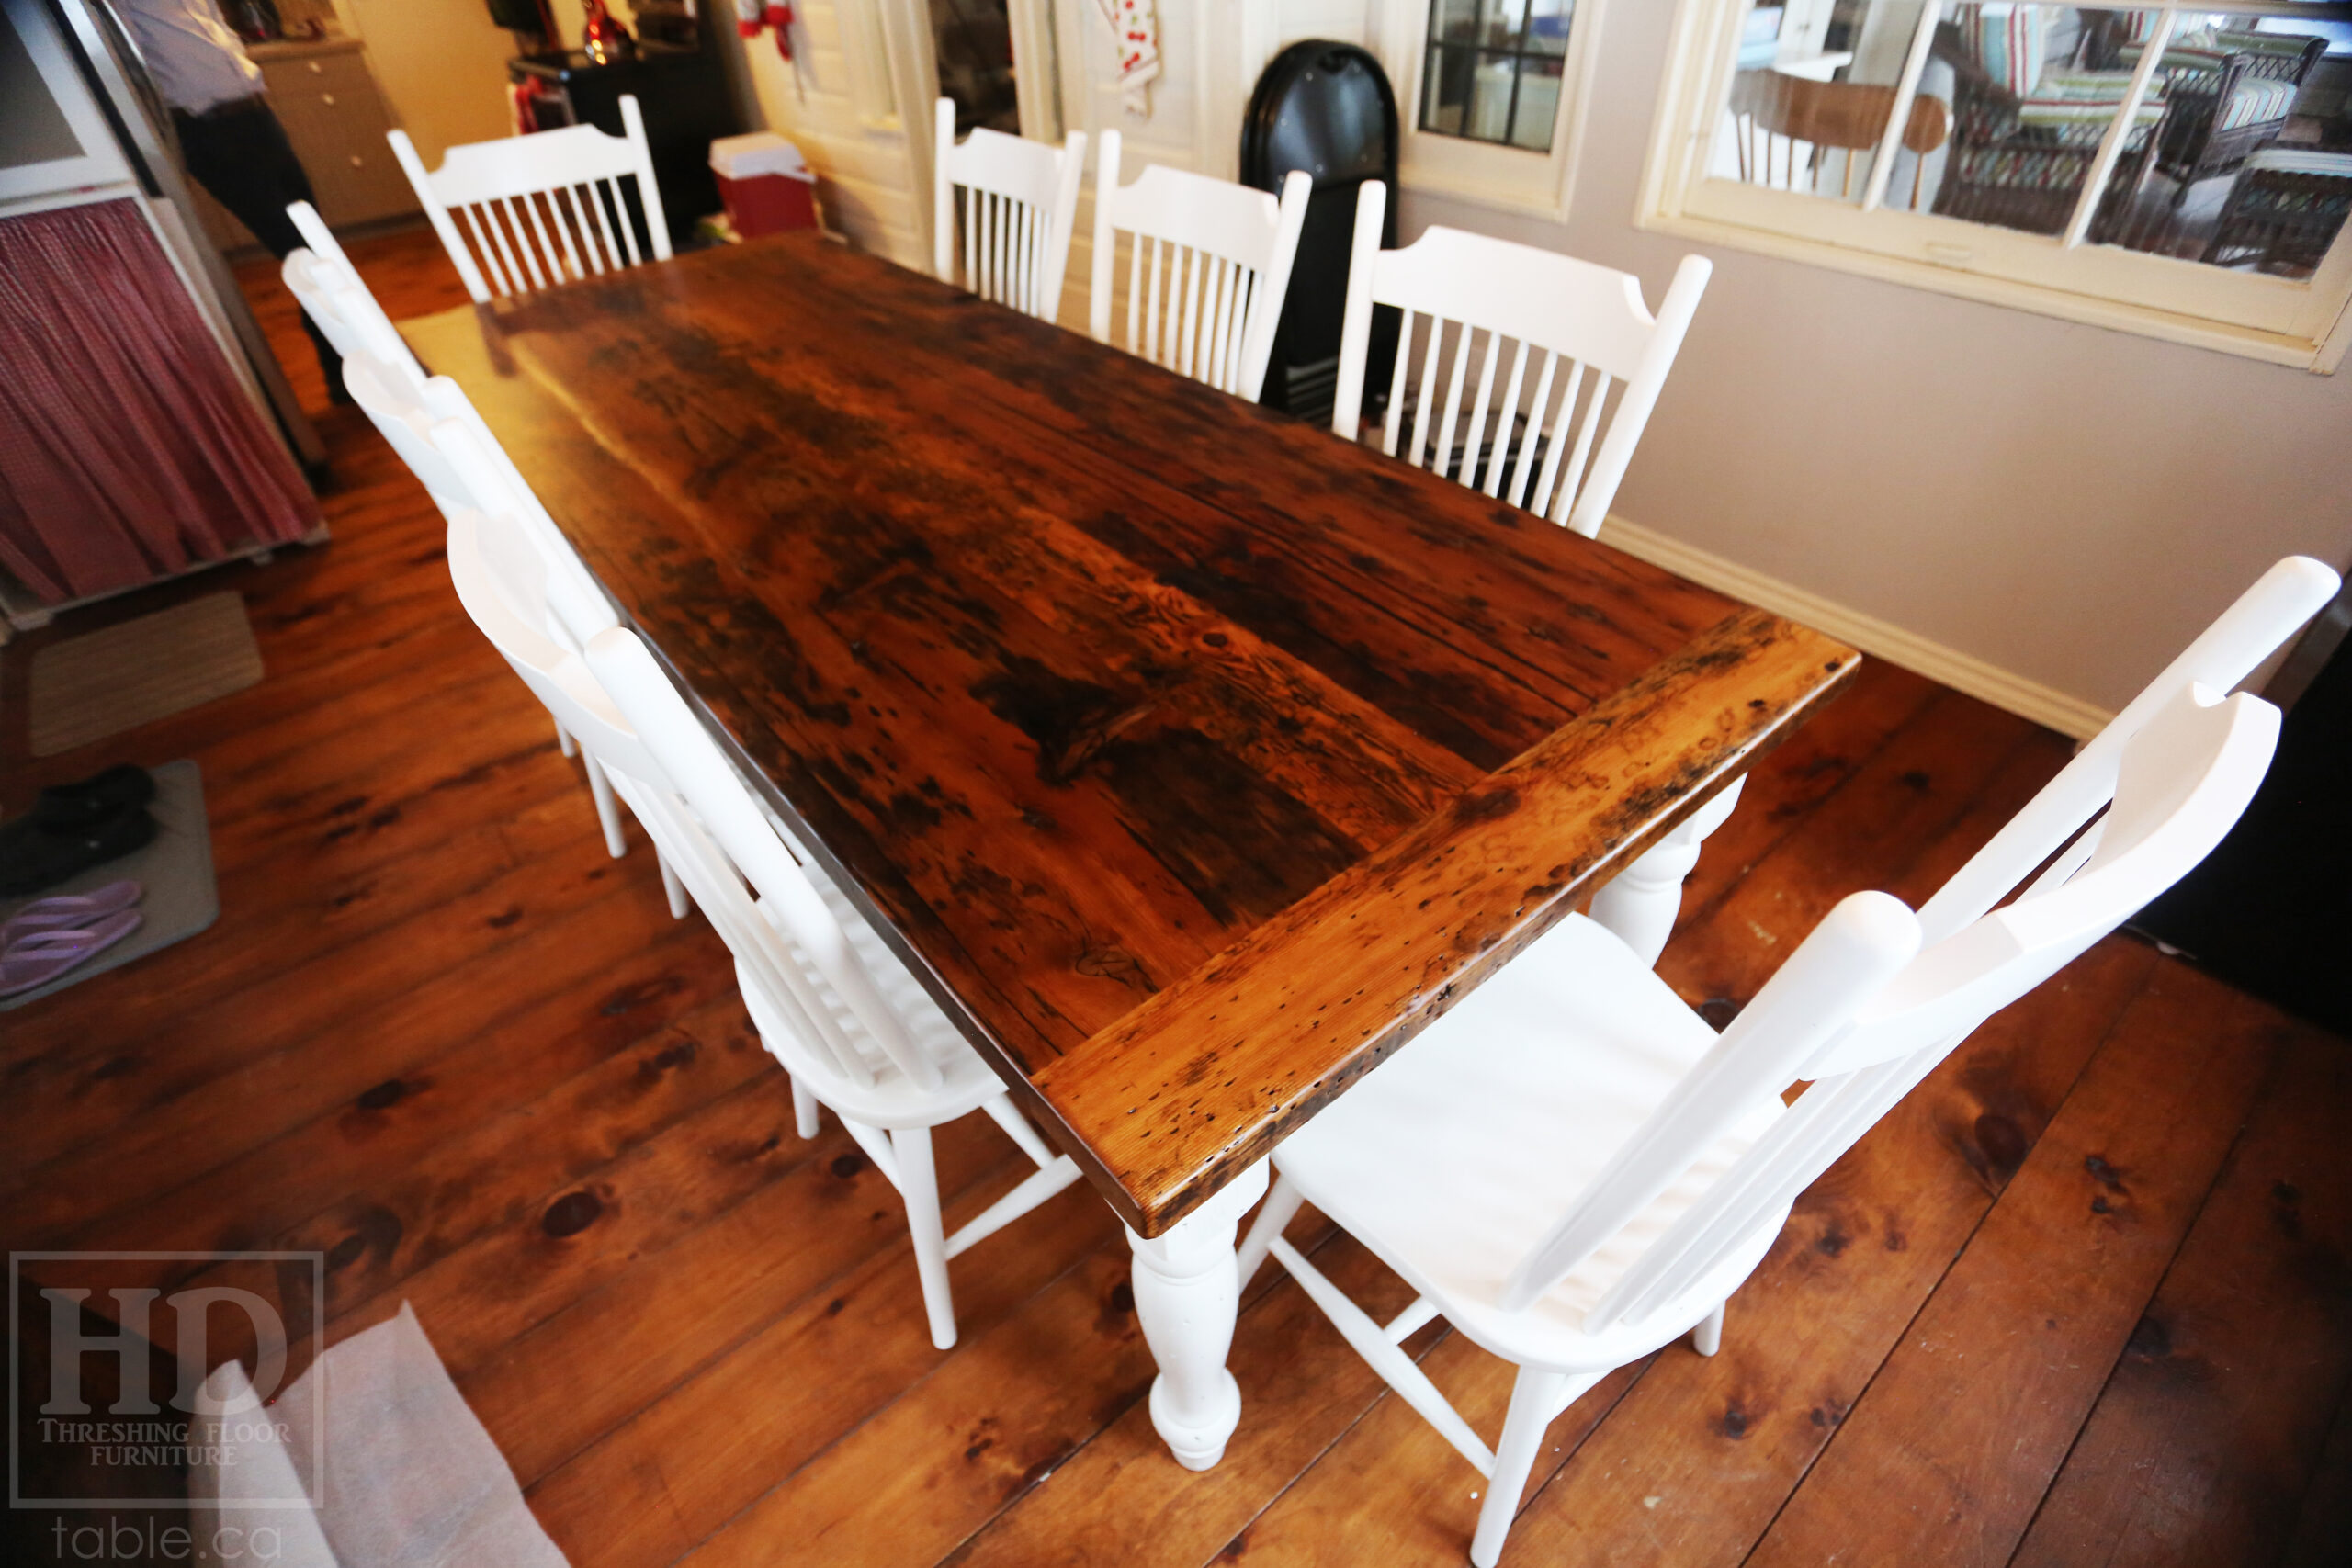 Project details: 8' Ontario Barnwood Table we made for a Kirkfield, Ontario cottage - 36" wide – Drawer Option at End Between Leaf Rails - Harvest Base / Turned Windbrace Beam Legs / White Painted Skirting & Legs – Reclaimed Old Growth Hemlock Threshing Floor Construction – Original edges & distressing maintained – Premium [light coating option] epoxy + matte polyurethane finish – Two 18” Leaf Extensions [making total length 11’ when extended] – 8 Buckhorn Chairs / Wormy Maple / Painted Solid White - www.table.ca